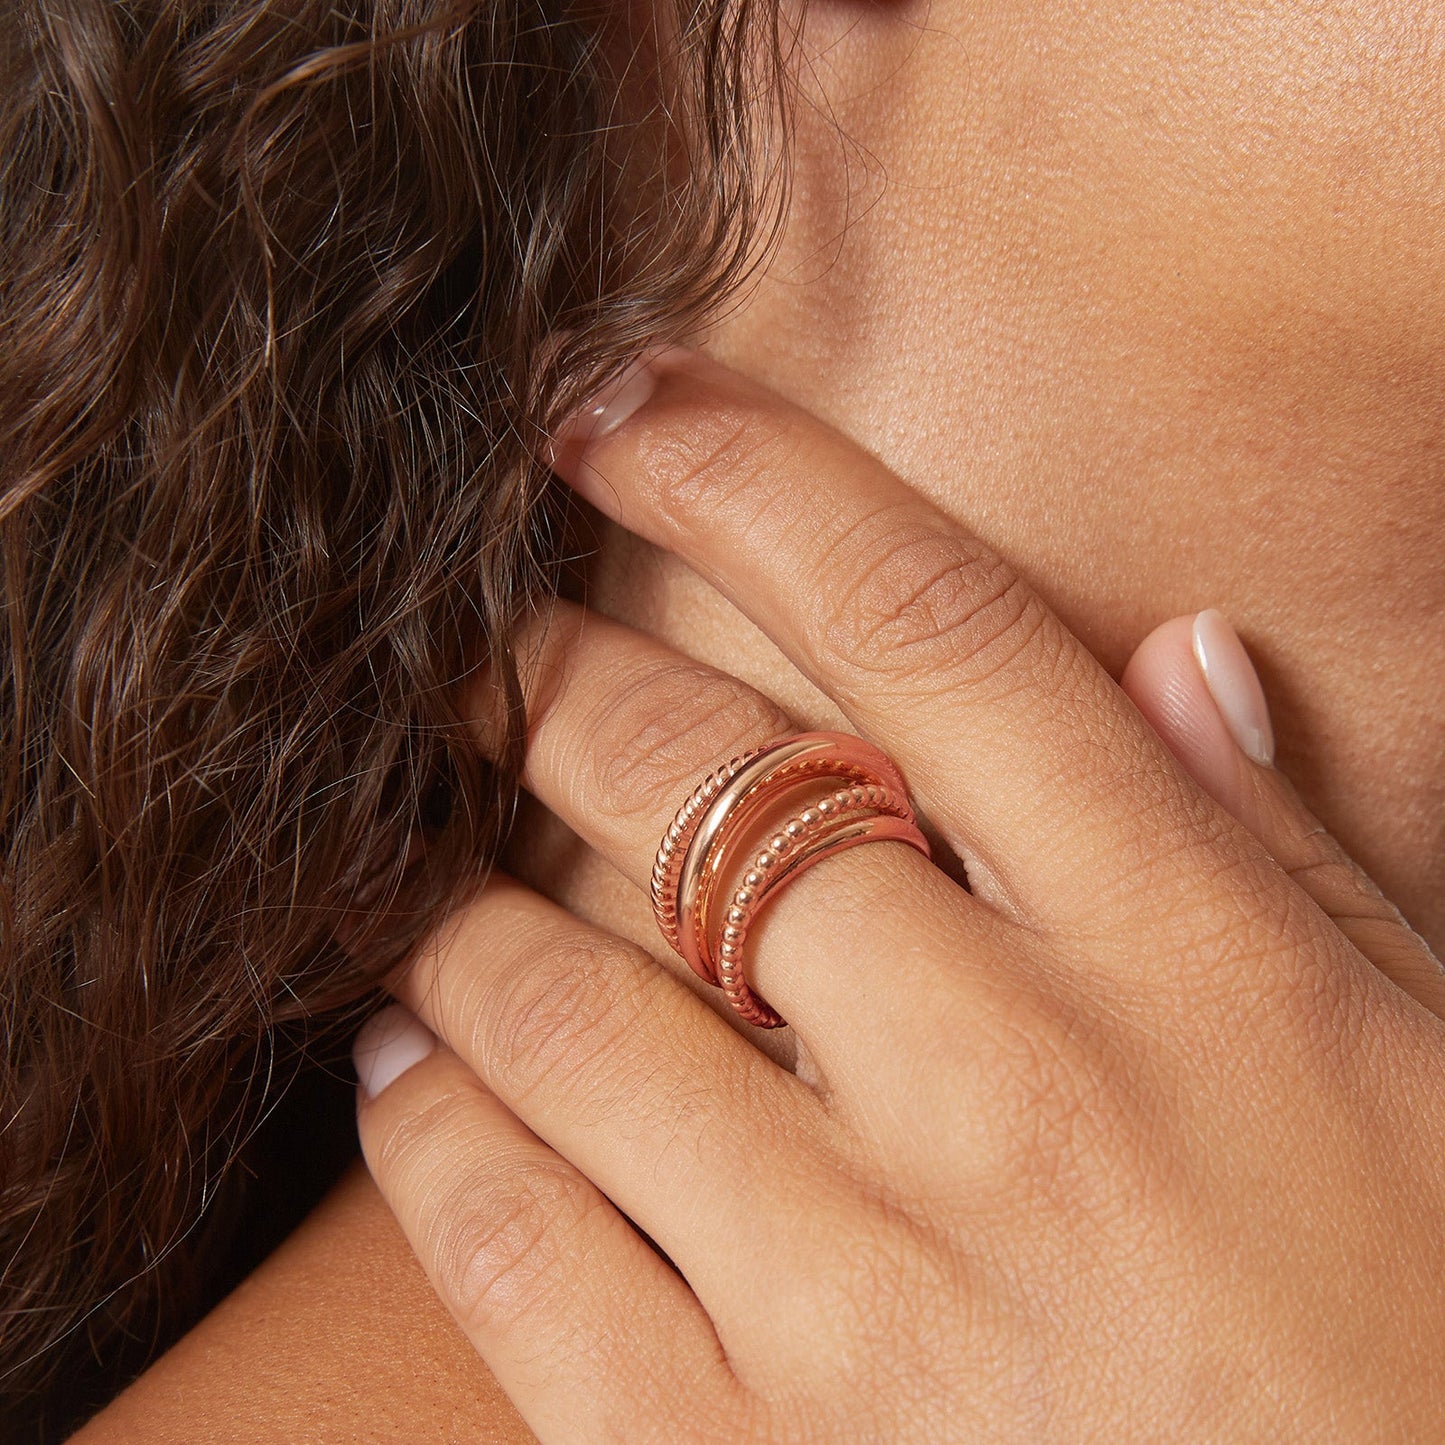 Cable Layered Ring in Rose Gold Plated Sterling Silver